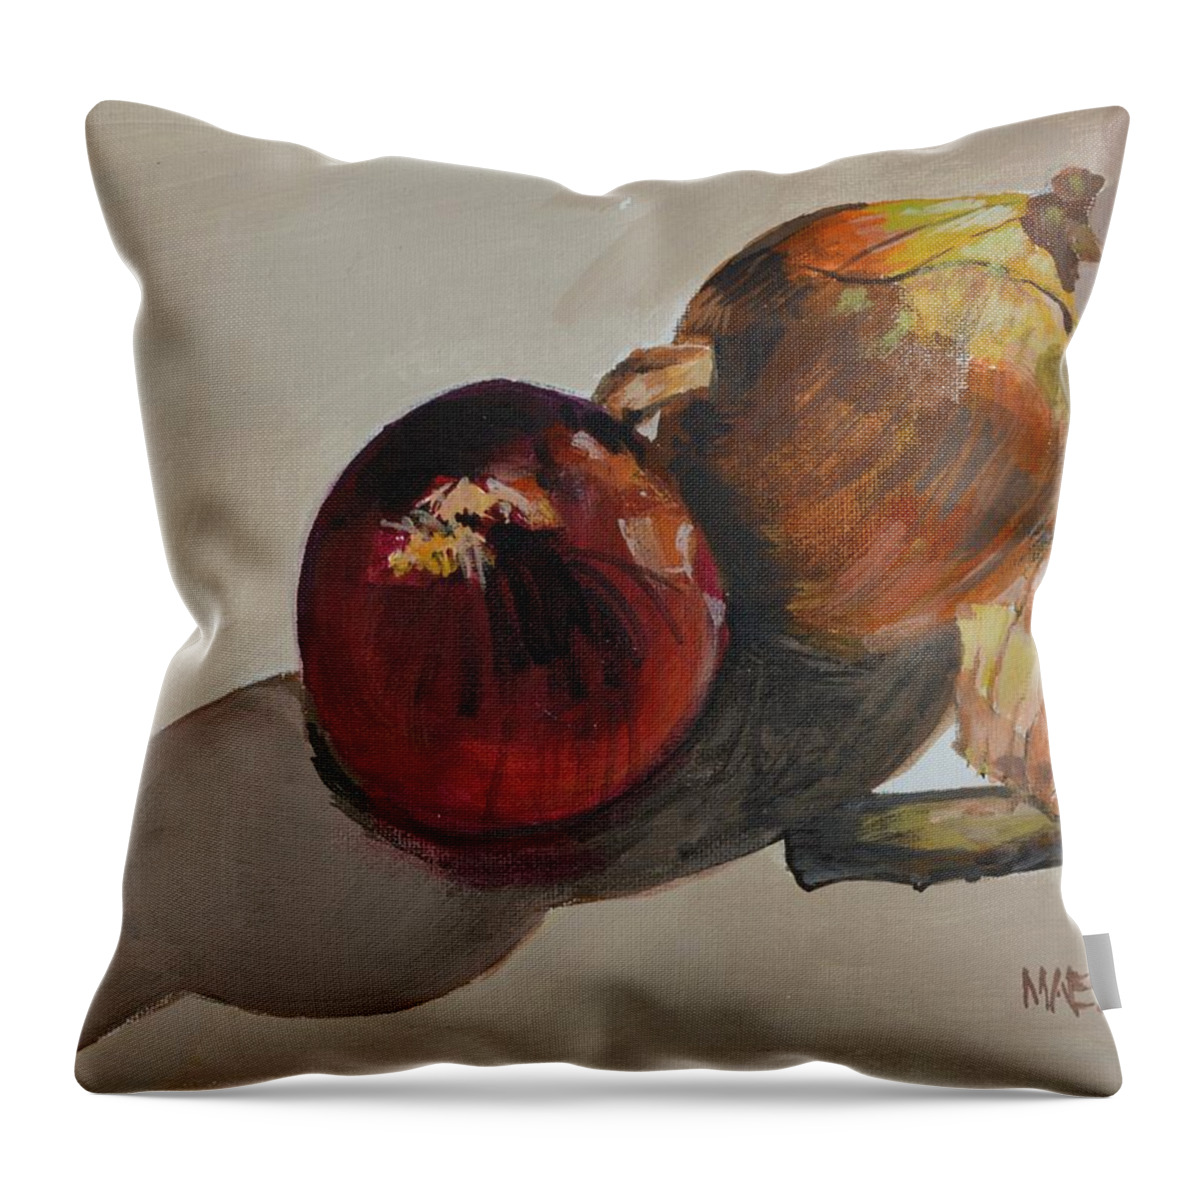 Waltmaes Throw Pillow featuring the painting Red And White by Walt Maes